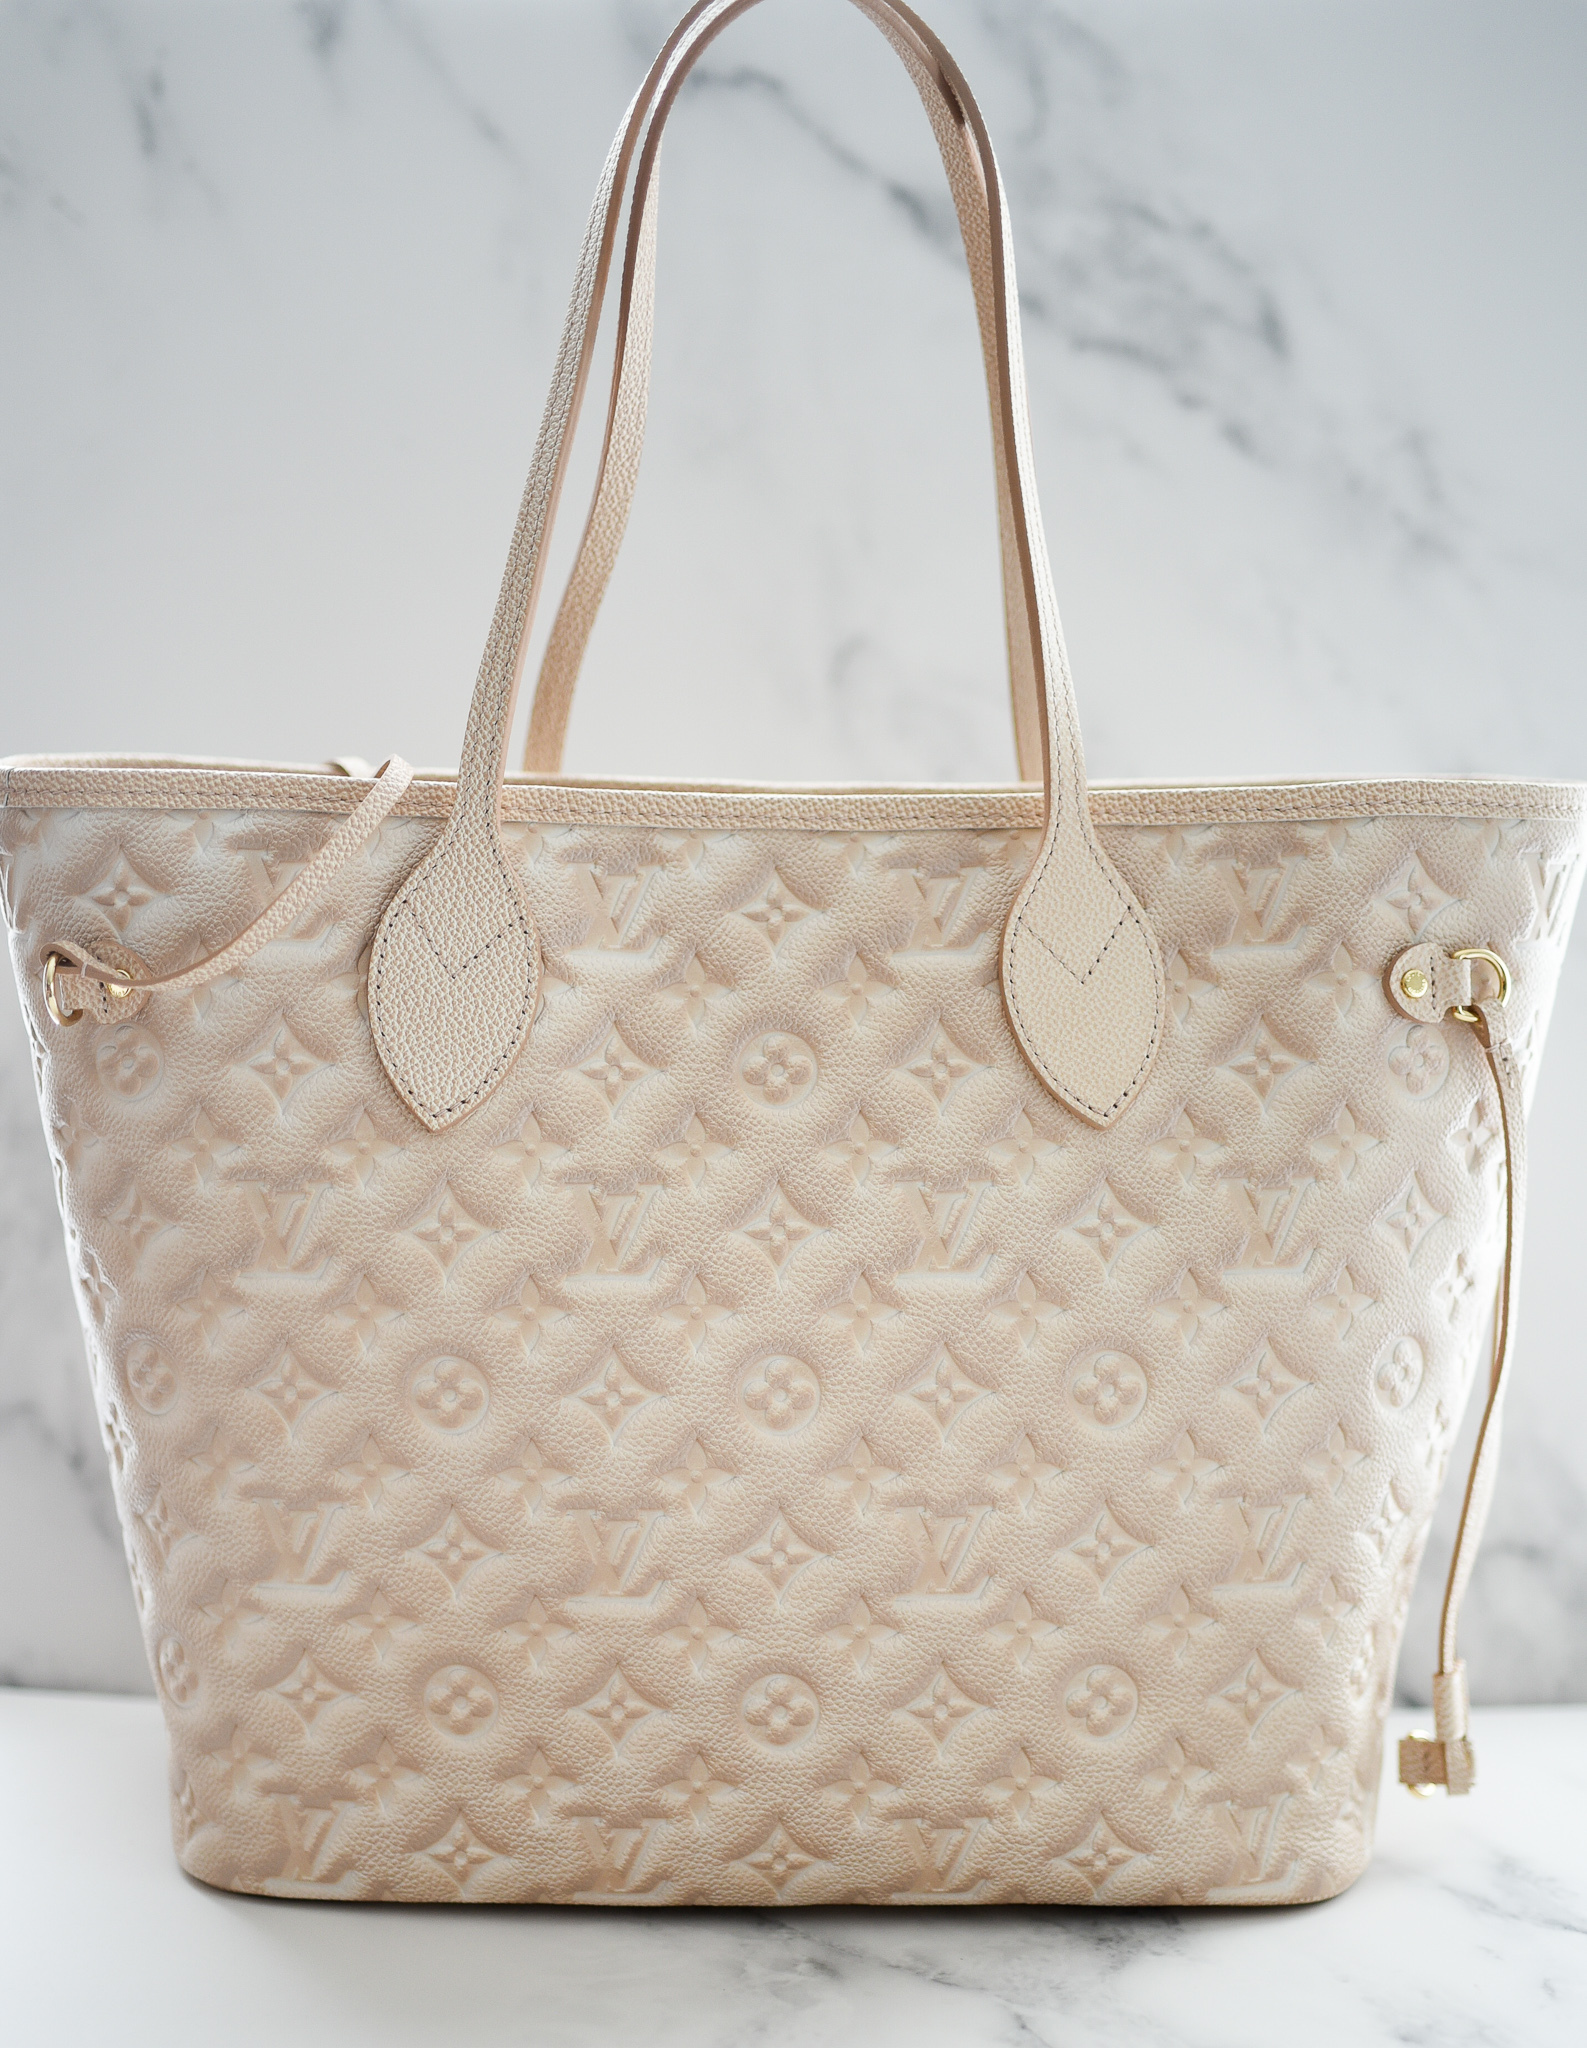 Louis Vuitton By The Pool On the Go GM, Mist Beige Ombre, New in Box WA001  - Julia Rose Boston